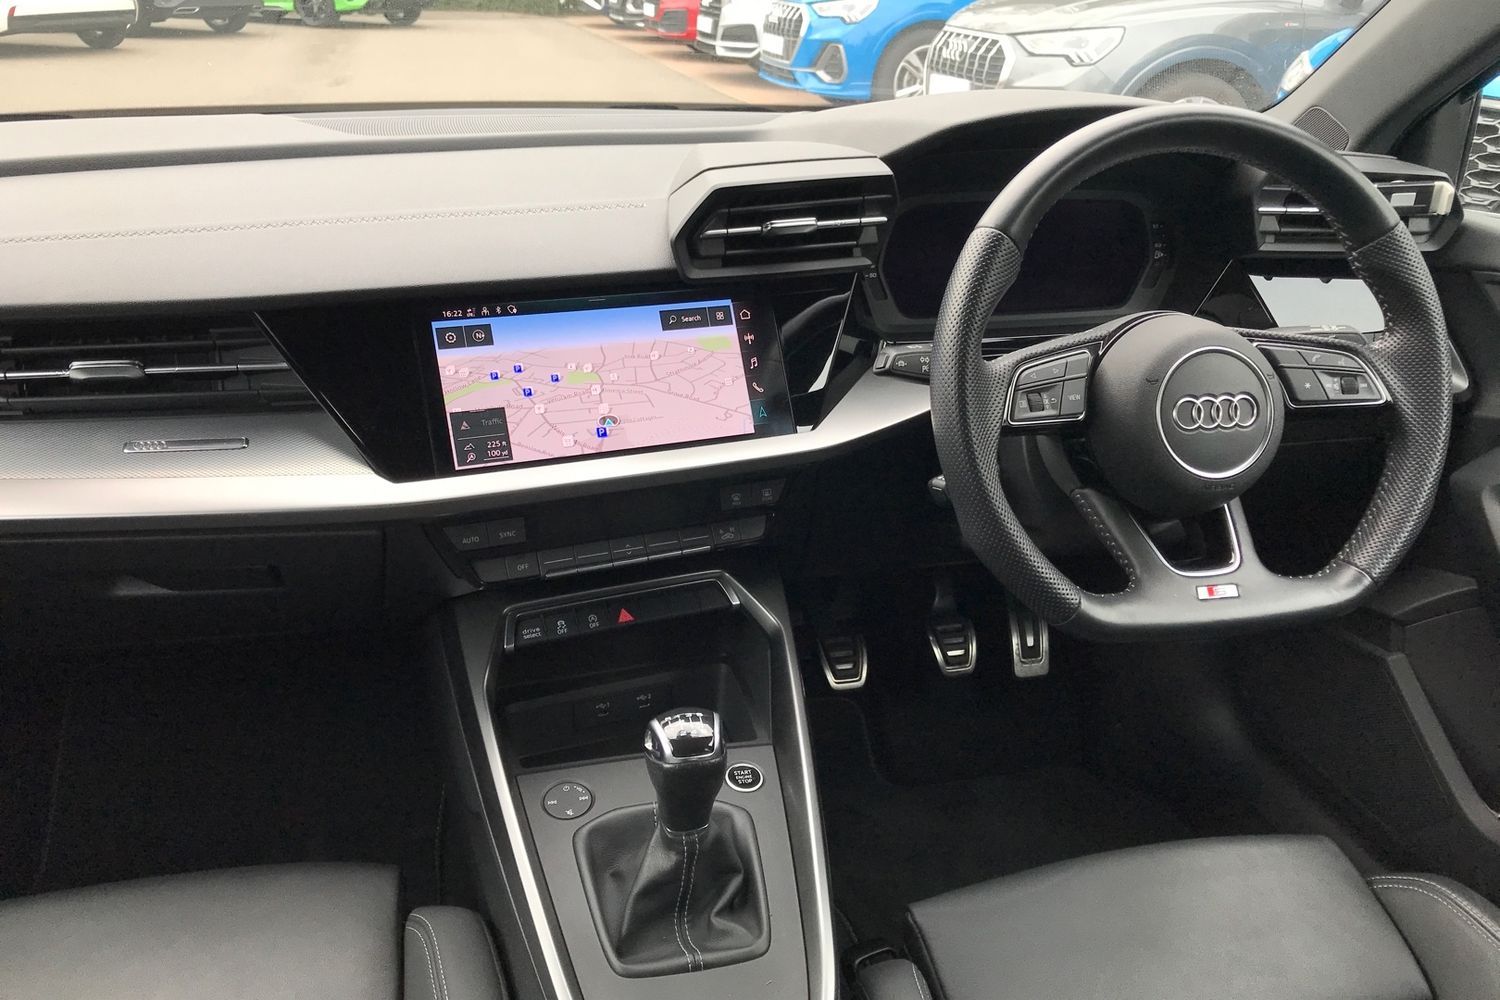 Audi A3 S line 35 TFSI 150 PS 6-speed